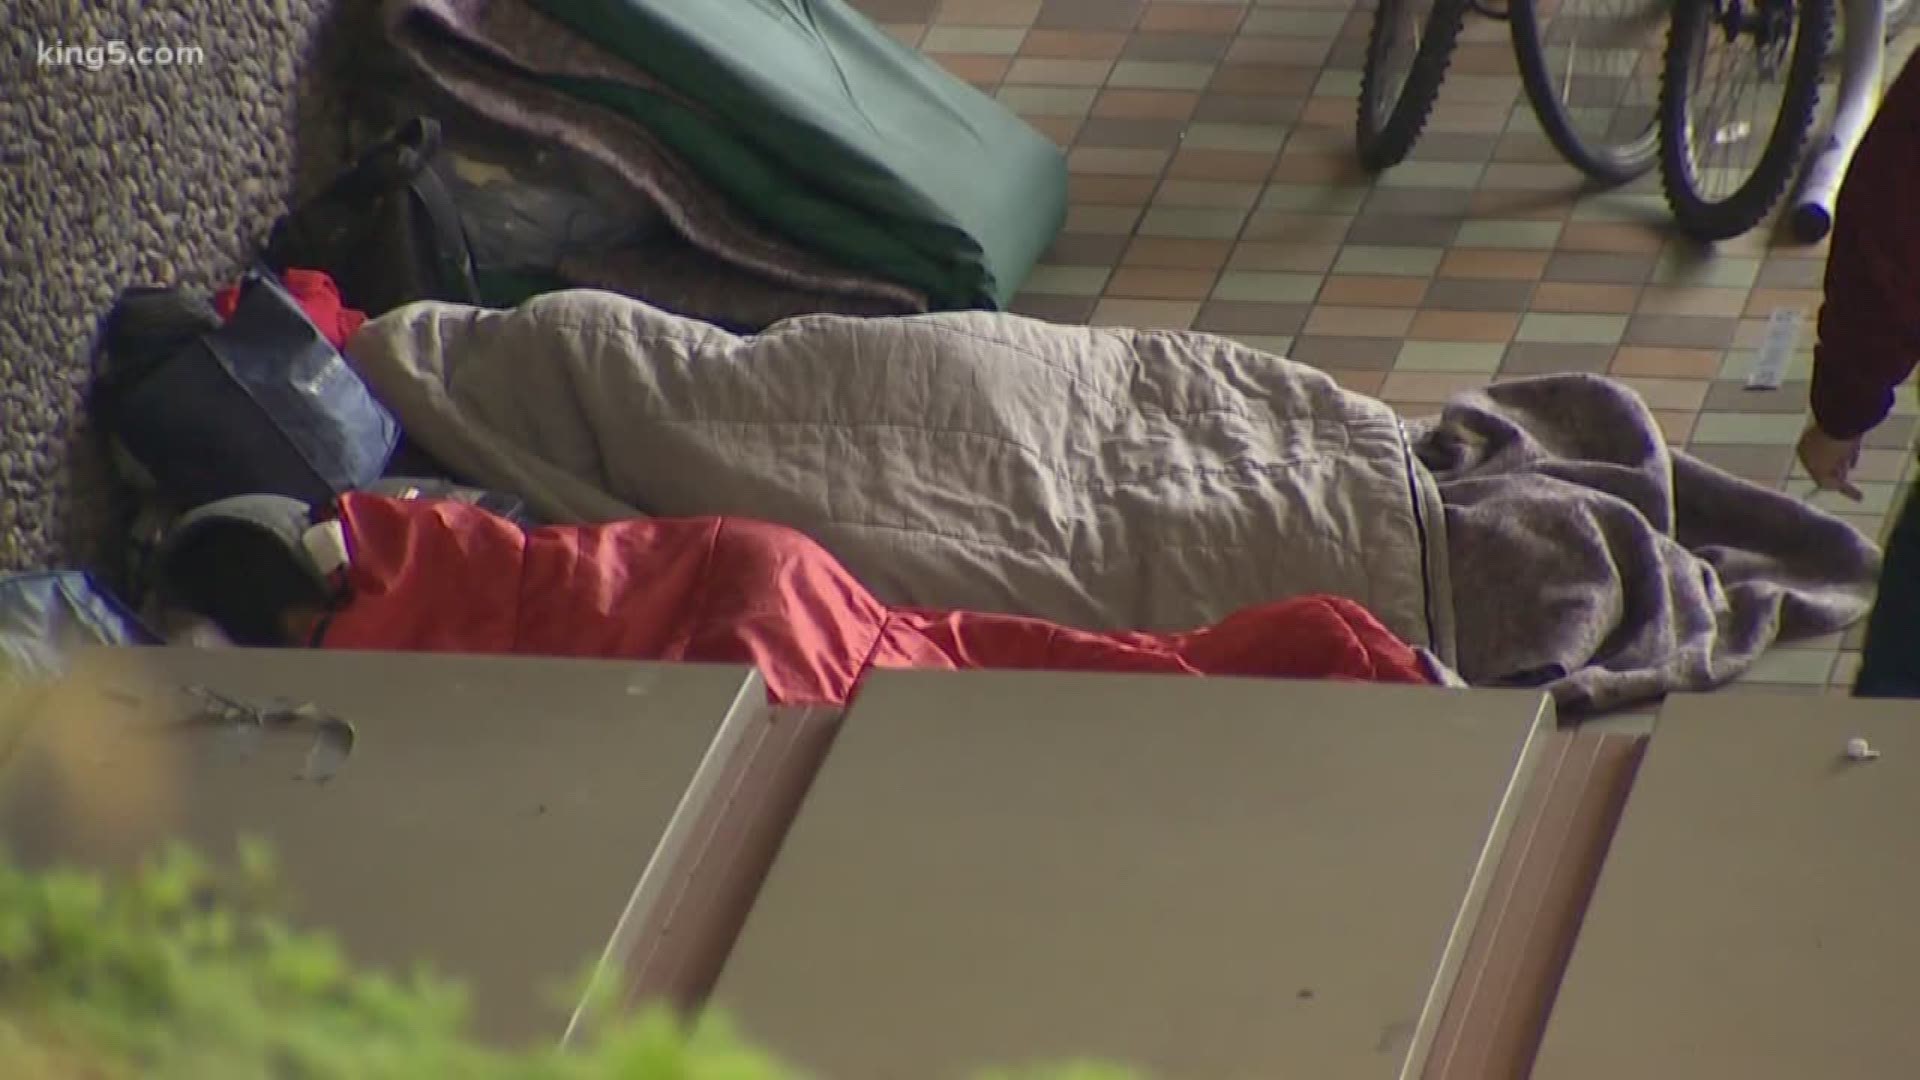 Non-profits are coming together to help get homeless youth off the streets